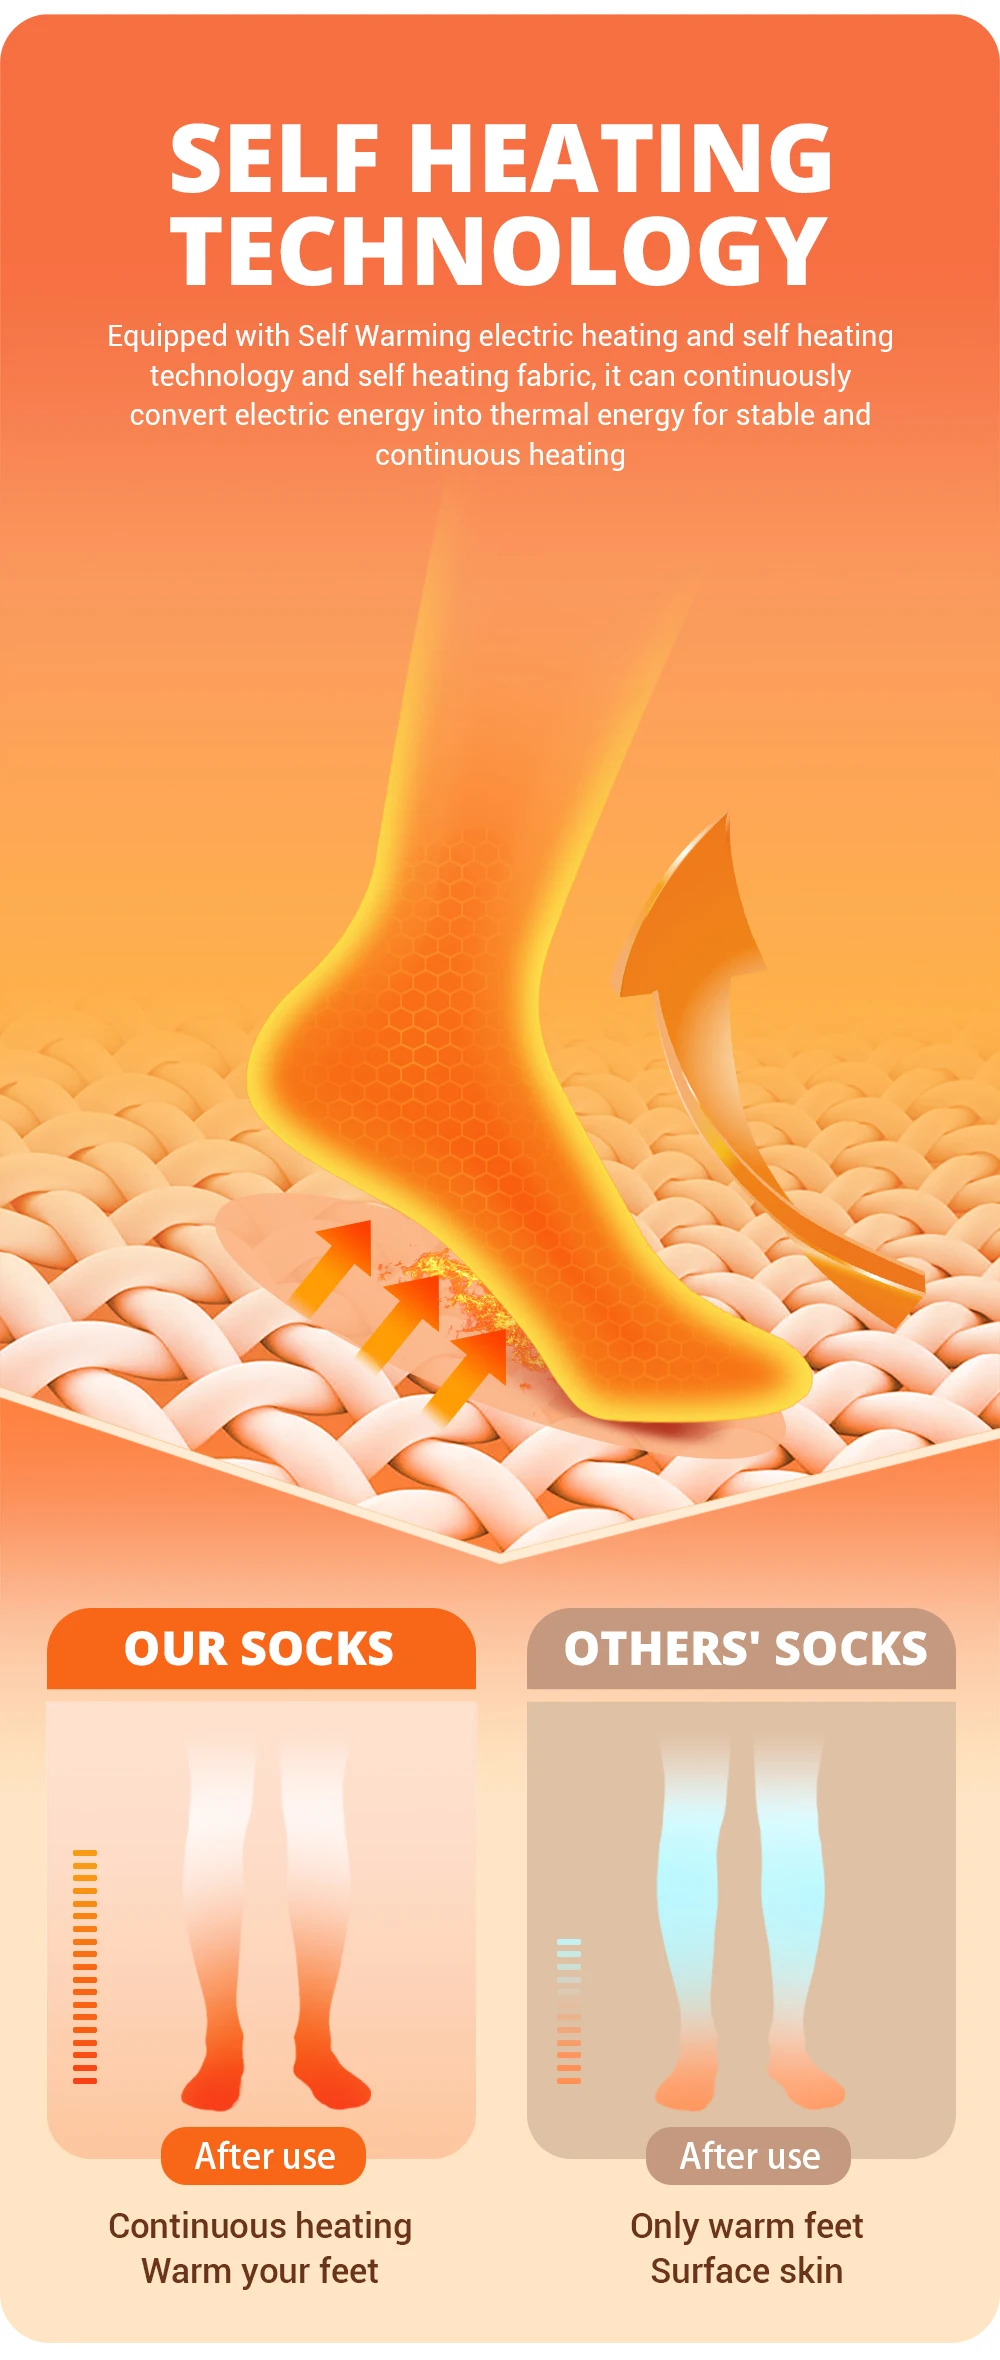 Self heating technology poster vector featuring built-in heaters for foot and toe warmth.